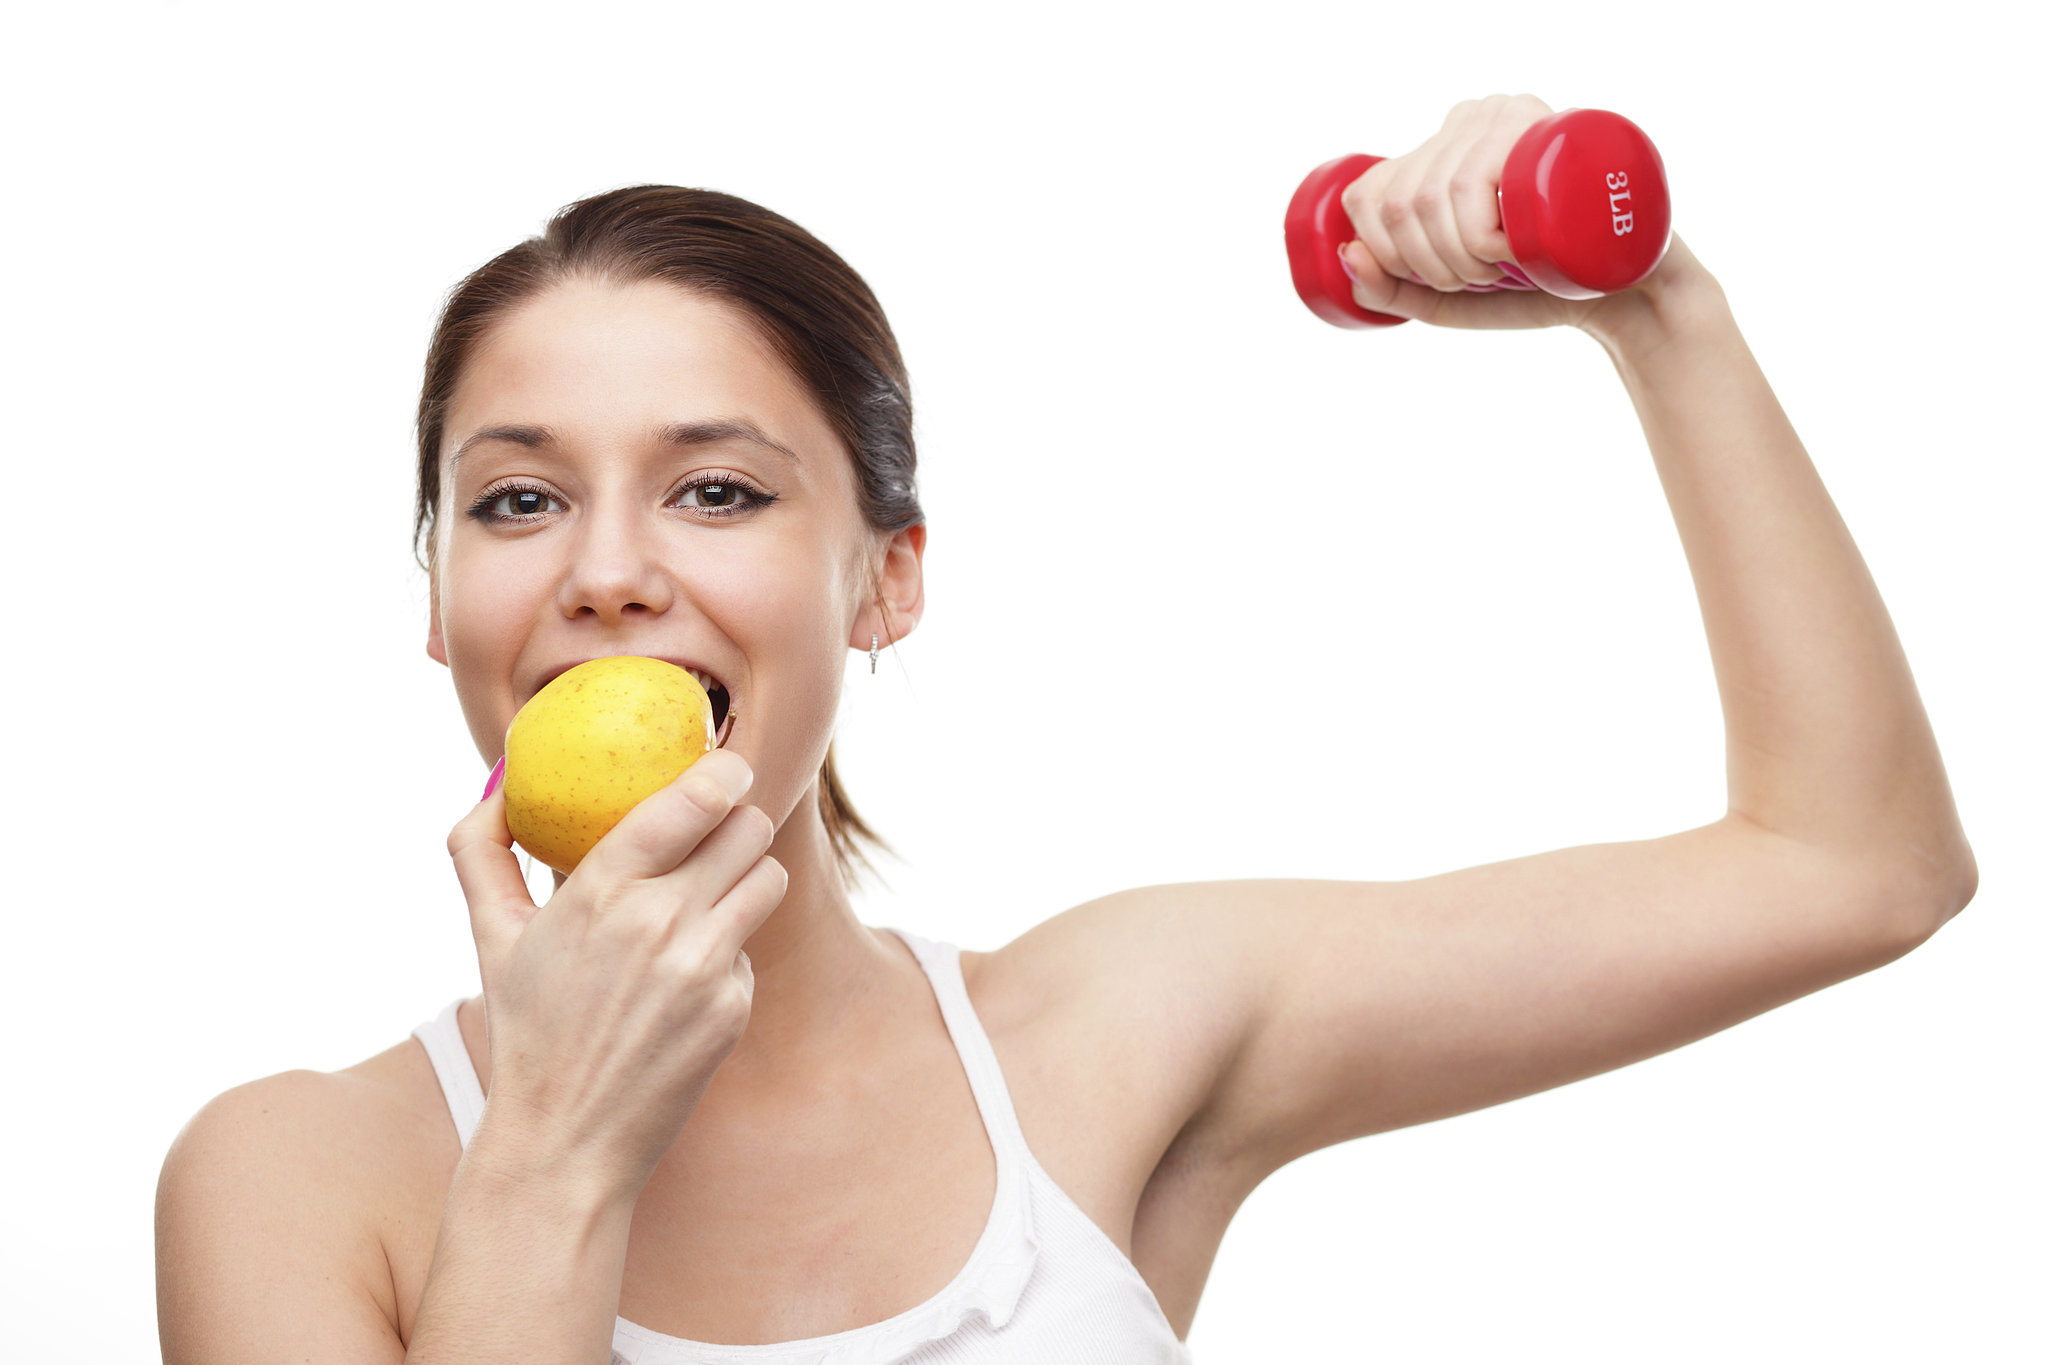 What to Eat Before Workout For Better Performance